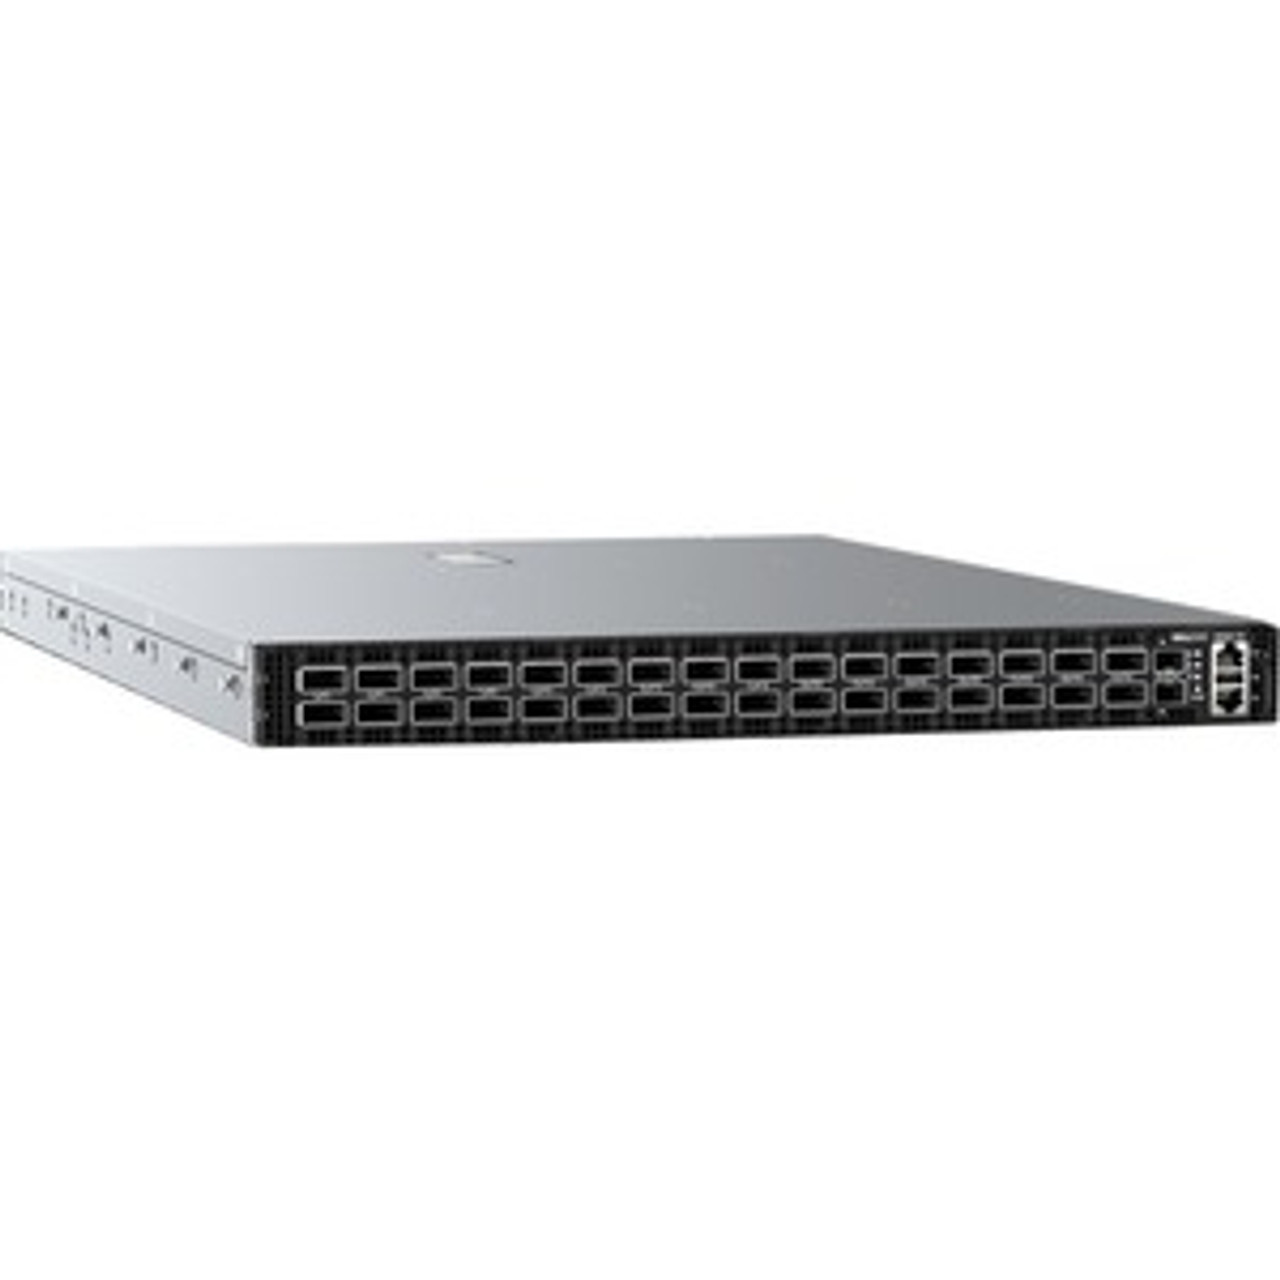 Z9332F-ON Dell EMC PowerSwitch Z9332F-ON Ethernet Switch - Manageable - 3 Layer Supported - Modular - 1500 W Power Consumption - Optical Fiber - 1U High -